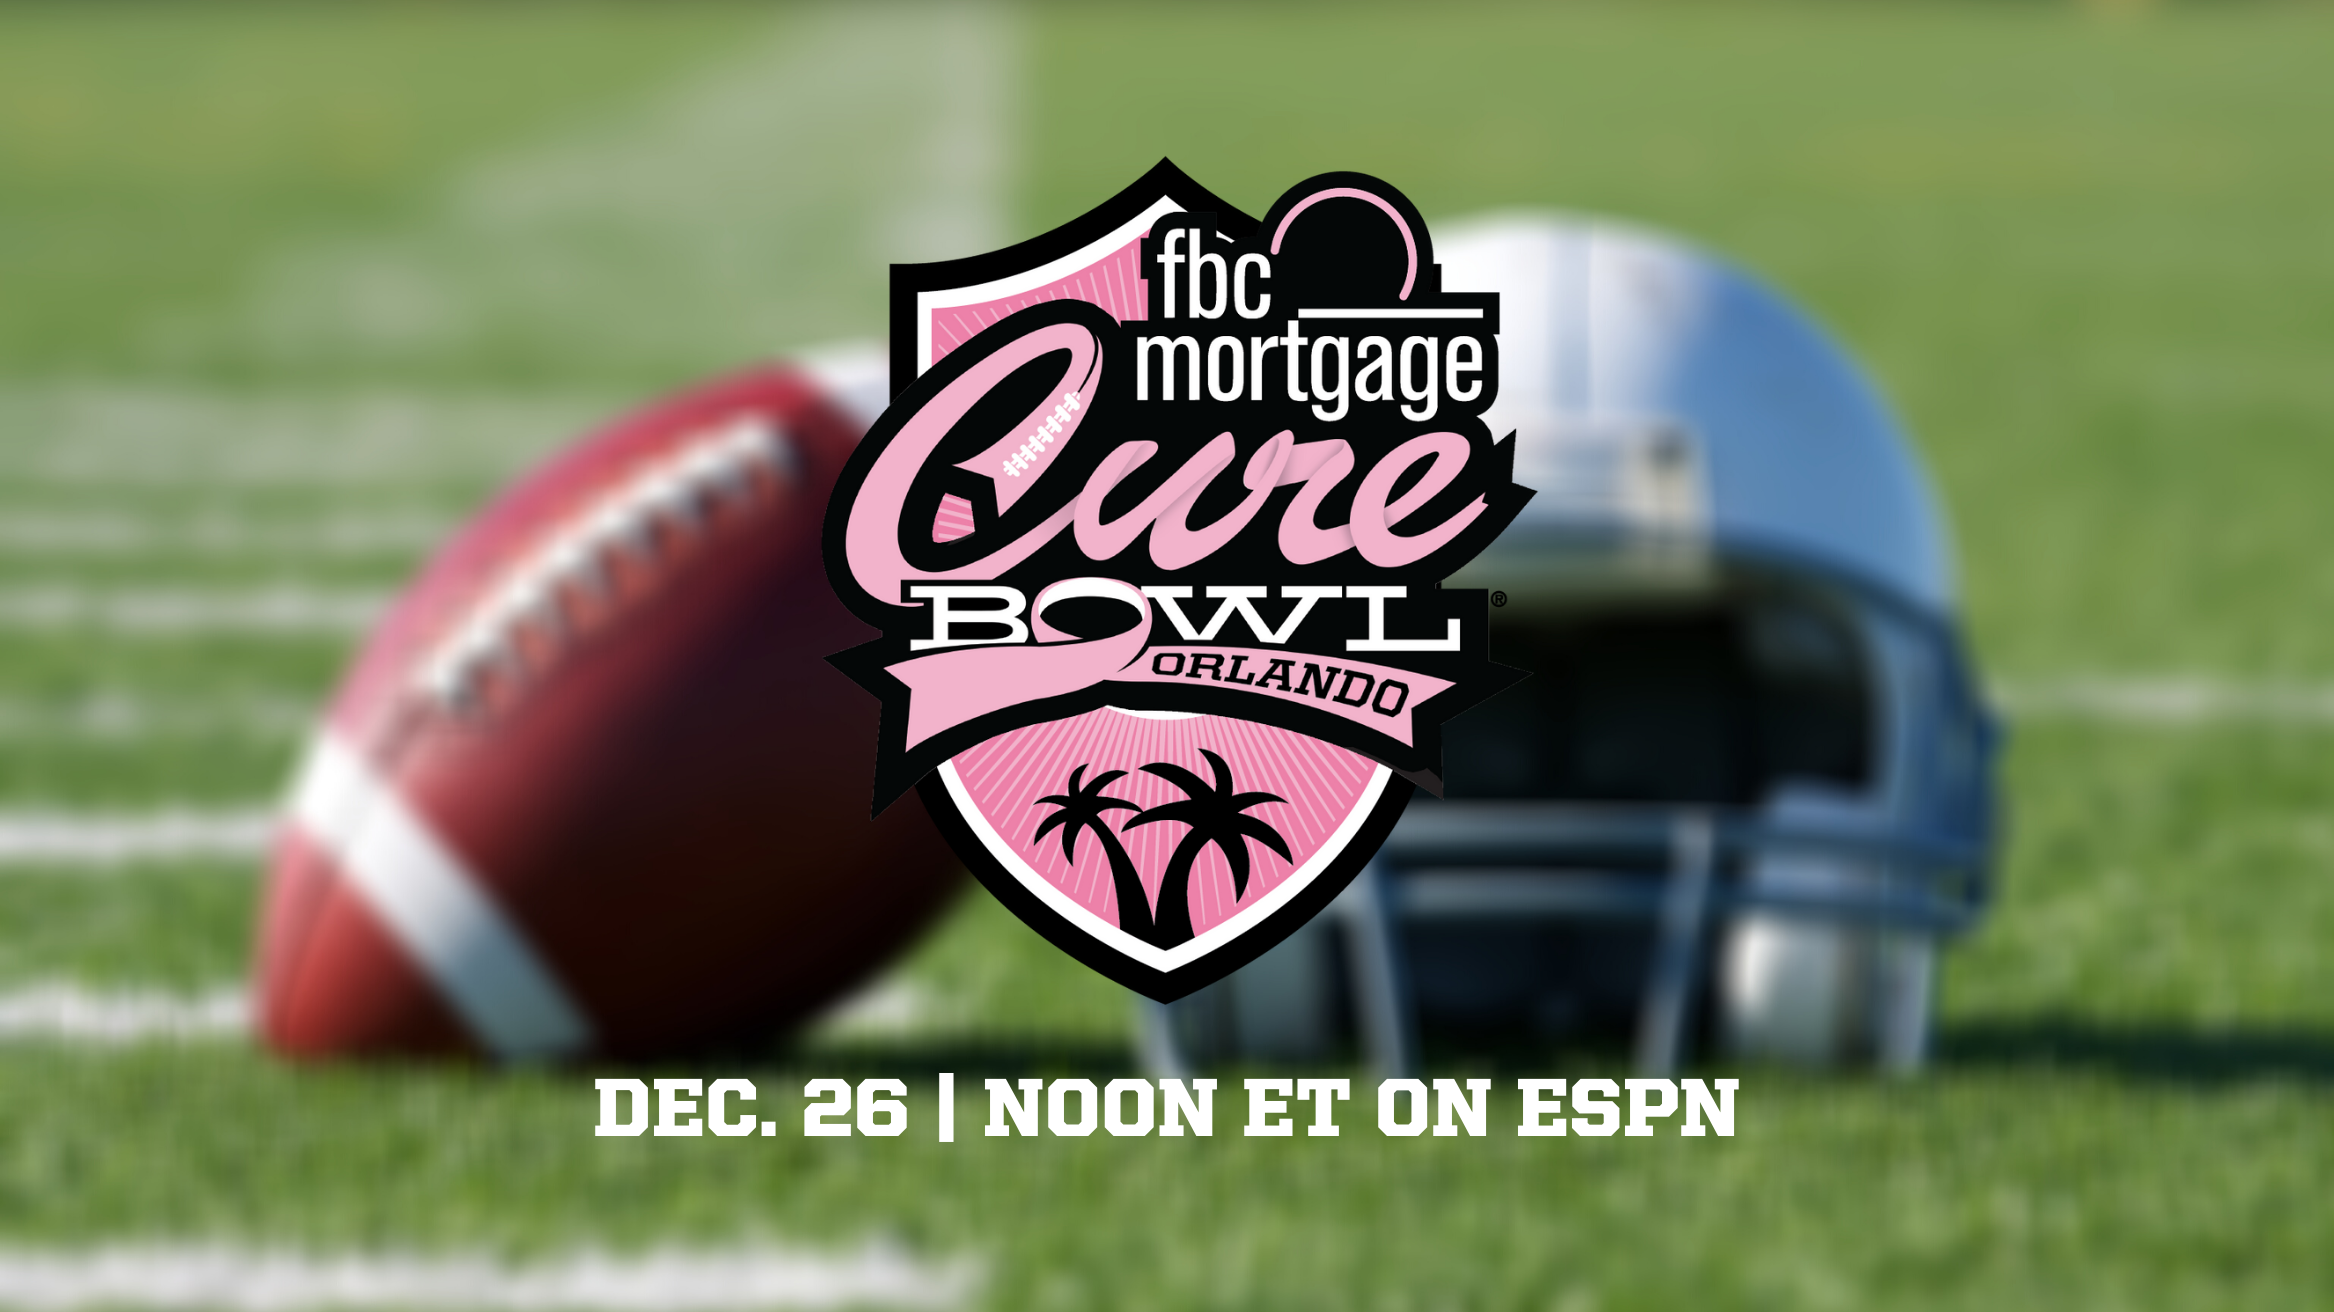 The image shows the Cure Bowl logo with FBC Mortgage's logo added. It reads "Dec. 26 Noon ET on ESPN". The background is a blurred image of a football and football helmet.